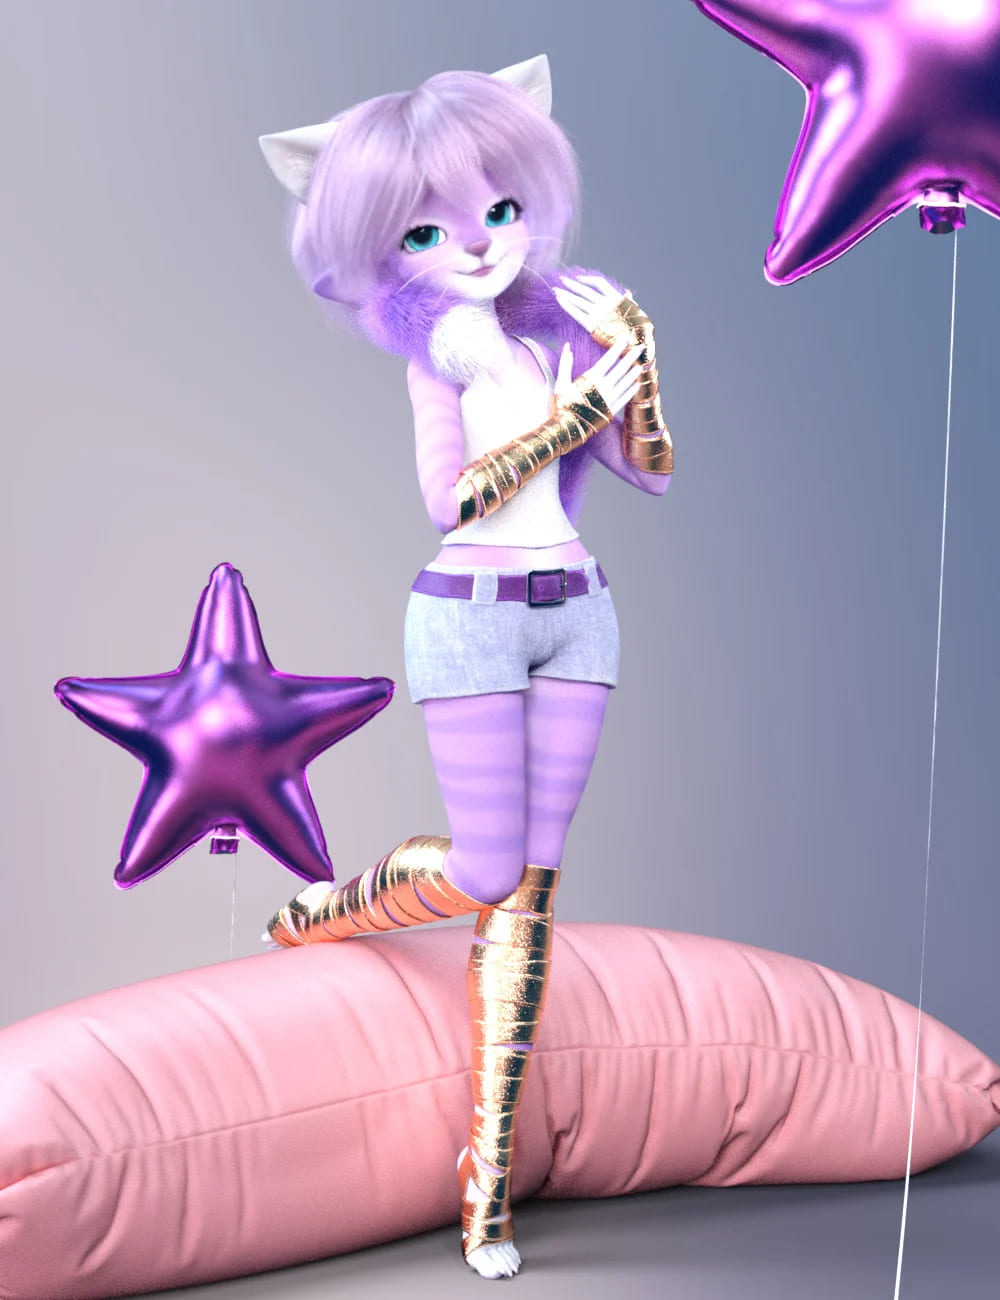 Kitty Poses for Thistle_DAZ3D下载站